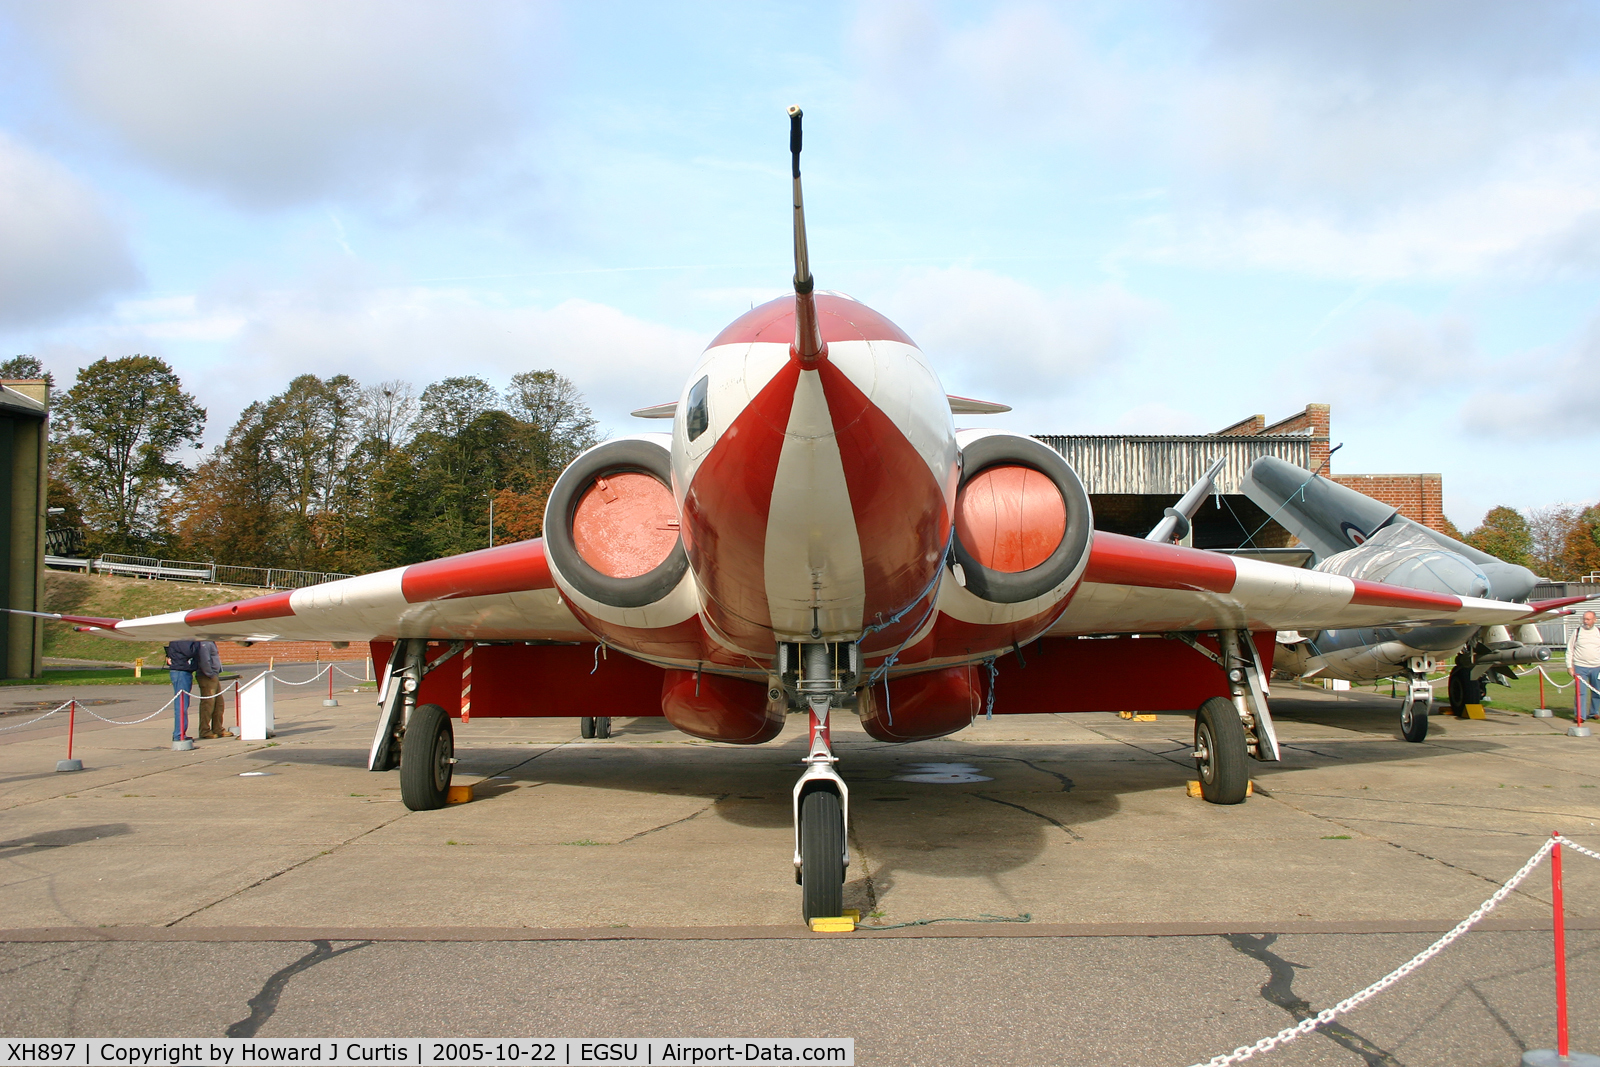 XH897, 1958 Gloster Javelin FAW.9 C/N Not found XH897, Preserved at the Imperial War Museum.